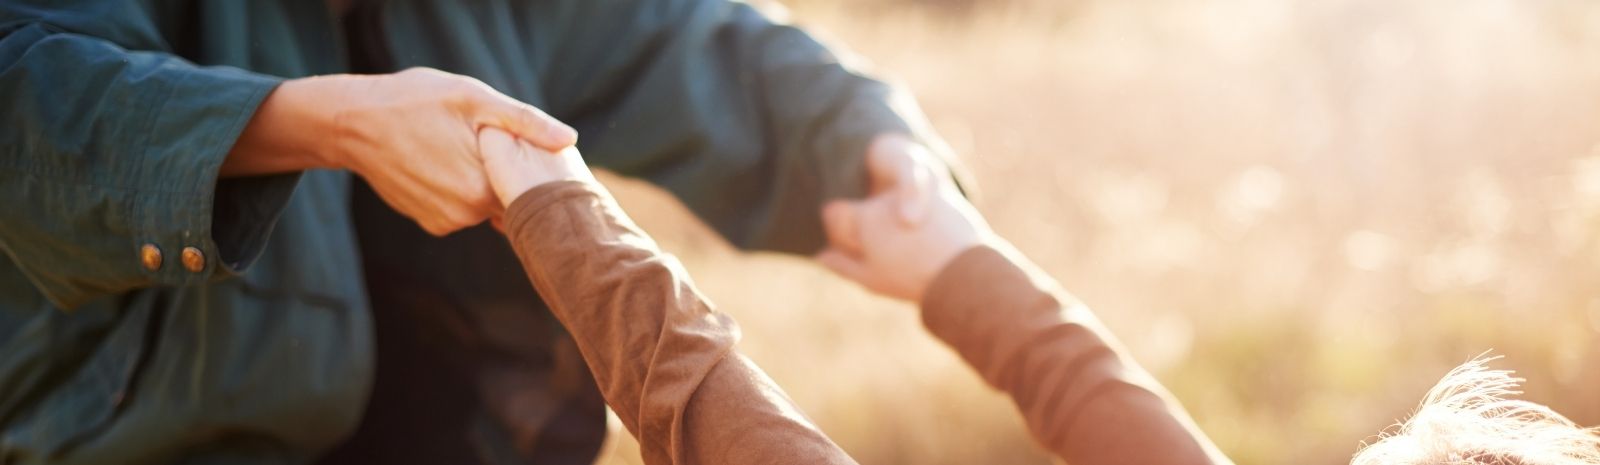 Cropped shot of two people holding hands while hiking outdoors